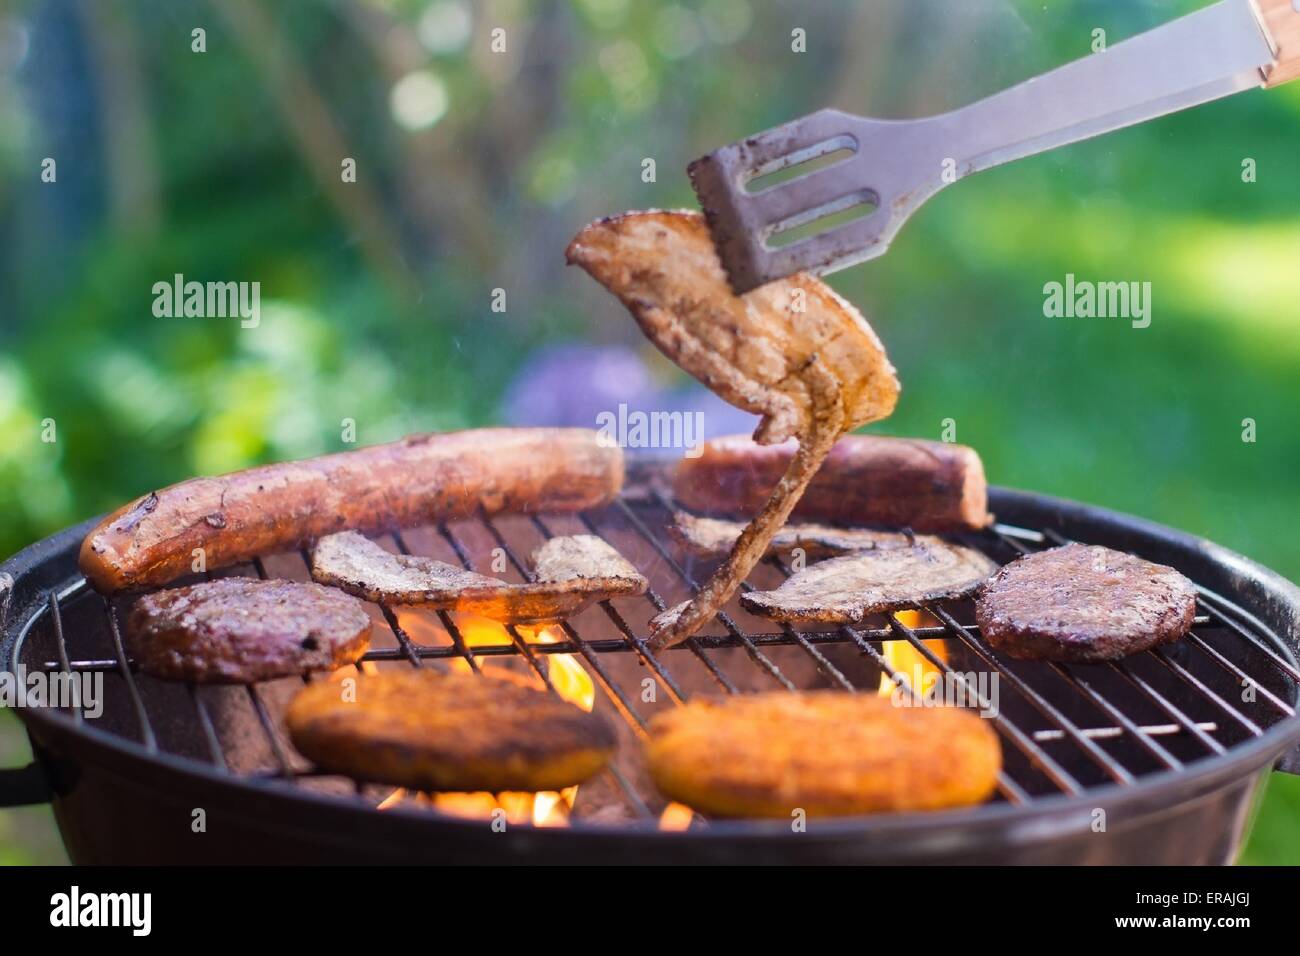 Grilled meat on bbq. Barbecue lunch in the garden. Grill tools. German sausage and steak for outdoor dinner. Stock Photo